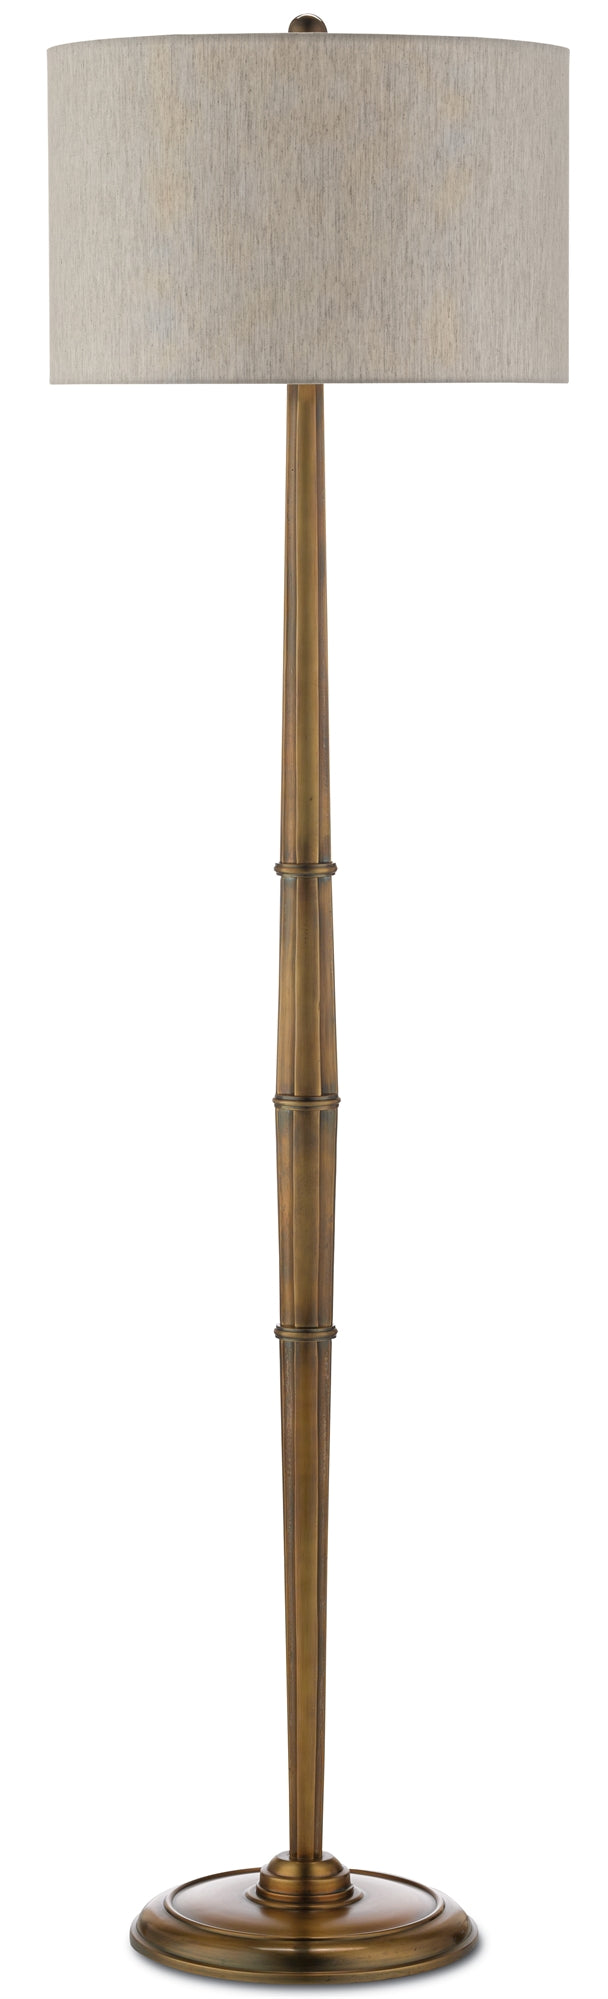 Currey and Company Harrelson Brass Floor Lamp 8000-0058